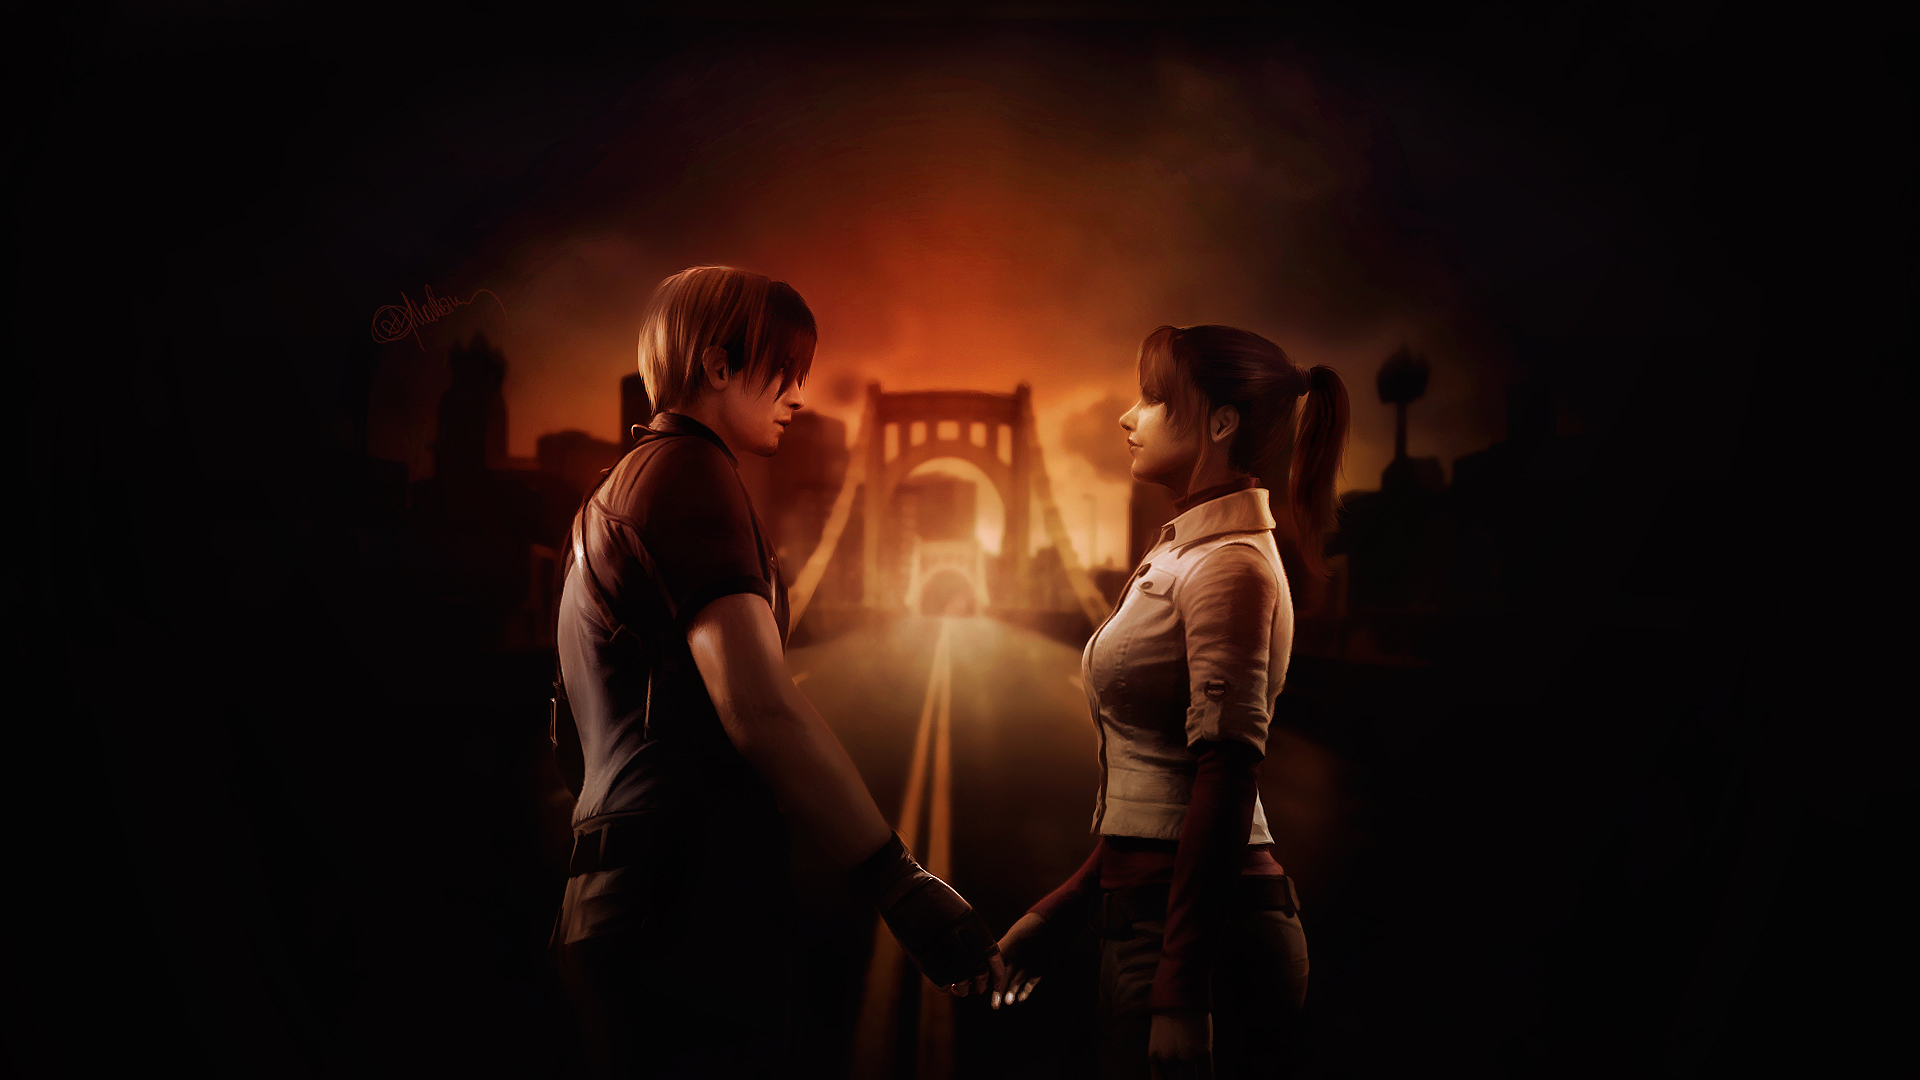 Leon + Claire. We must stand together